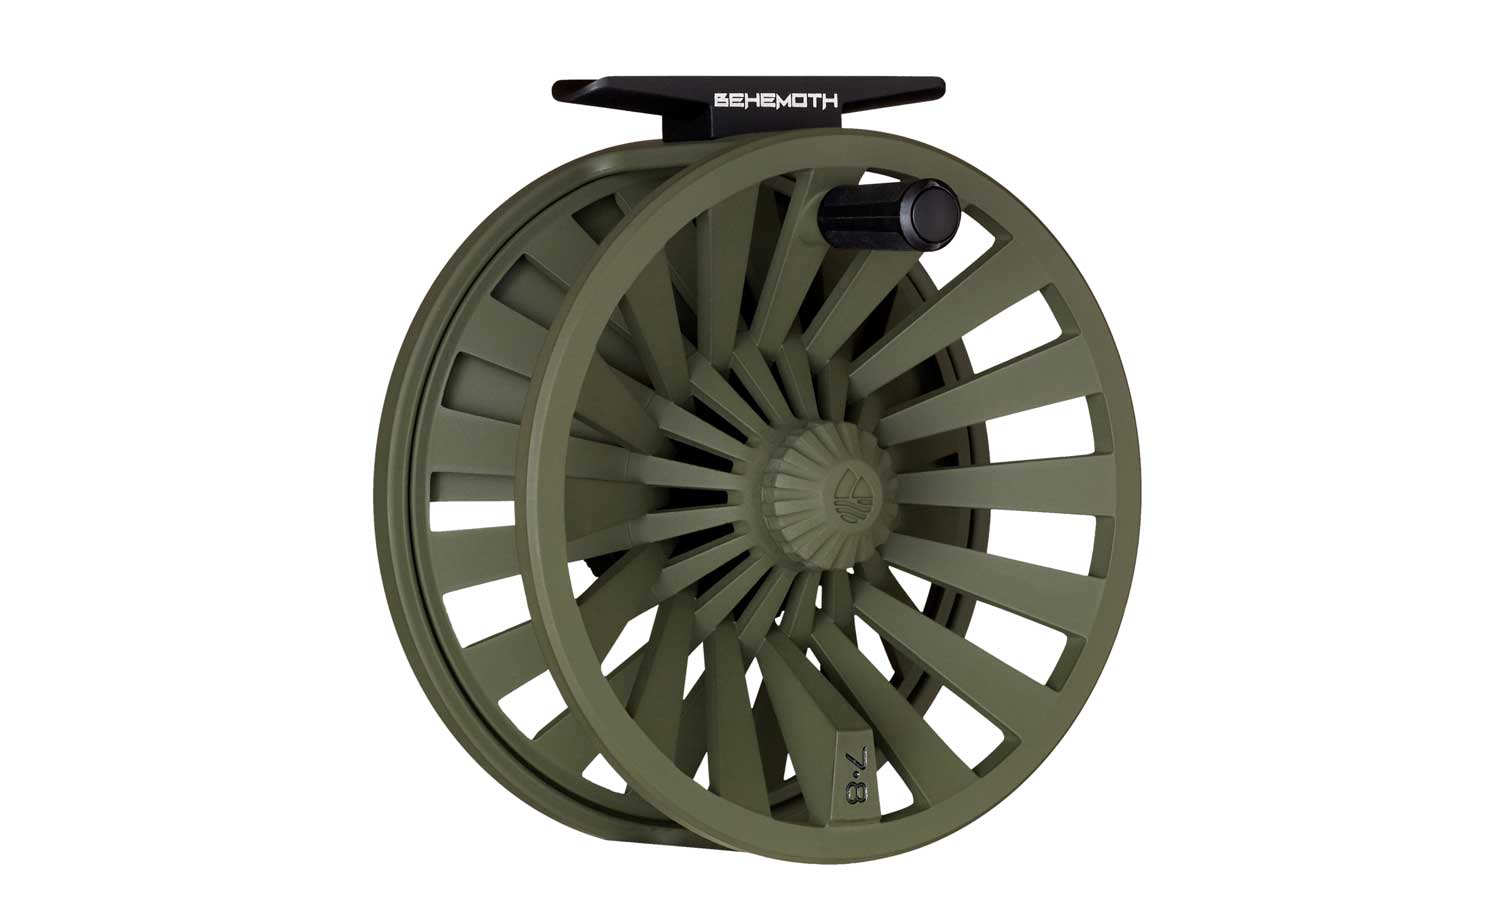 Redington Grande 7/8/9 wt Fly Reel SPOOL W 8 Wt All Round Line And Backing  